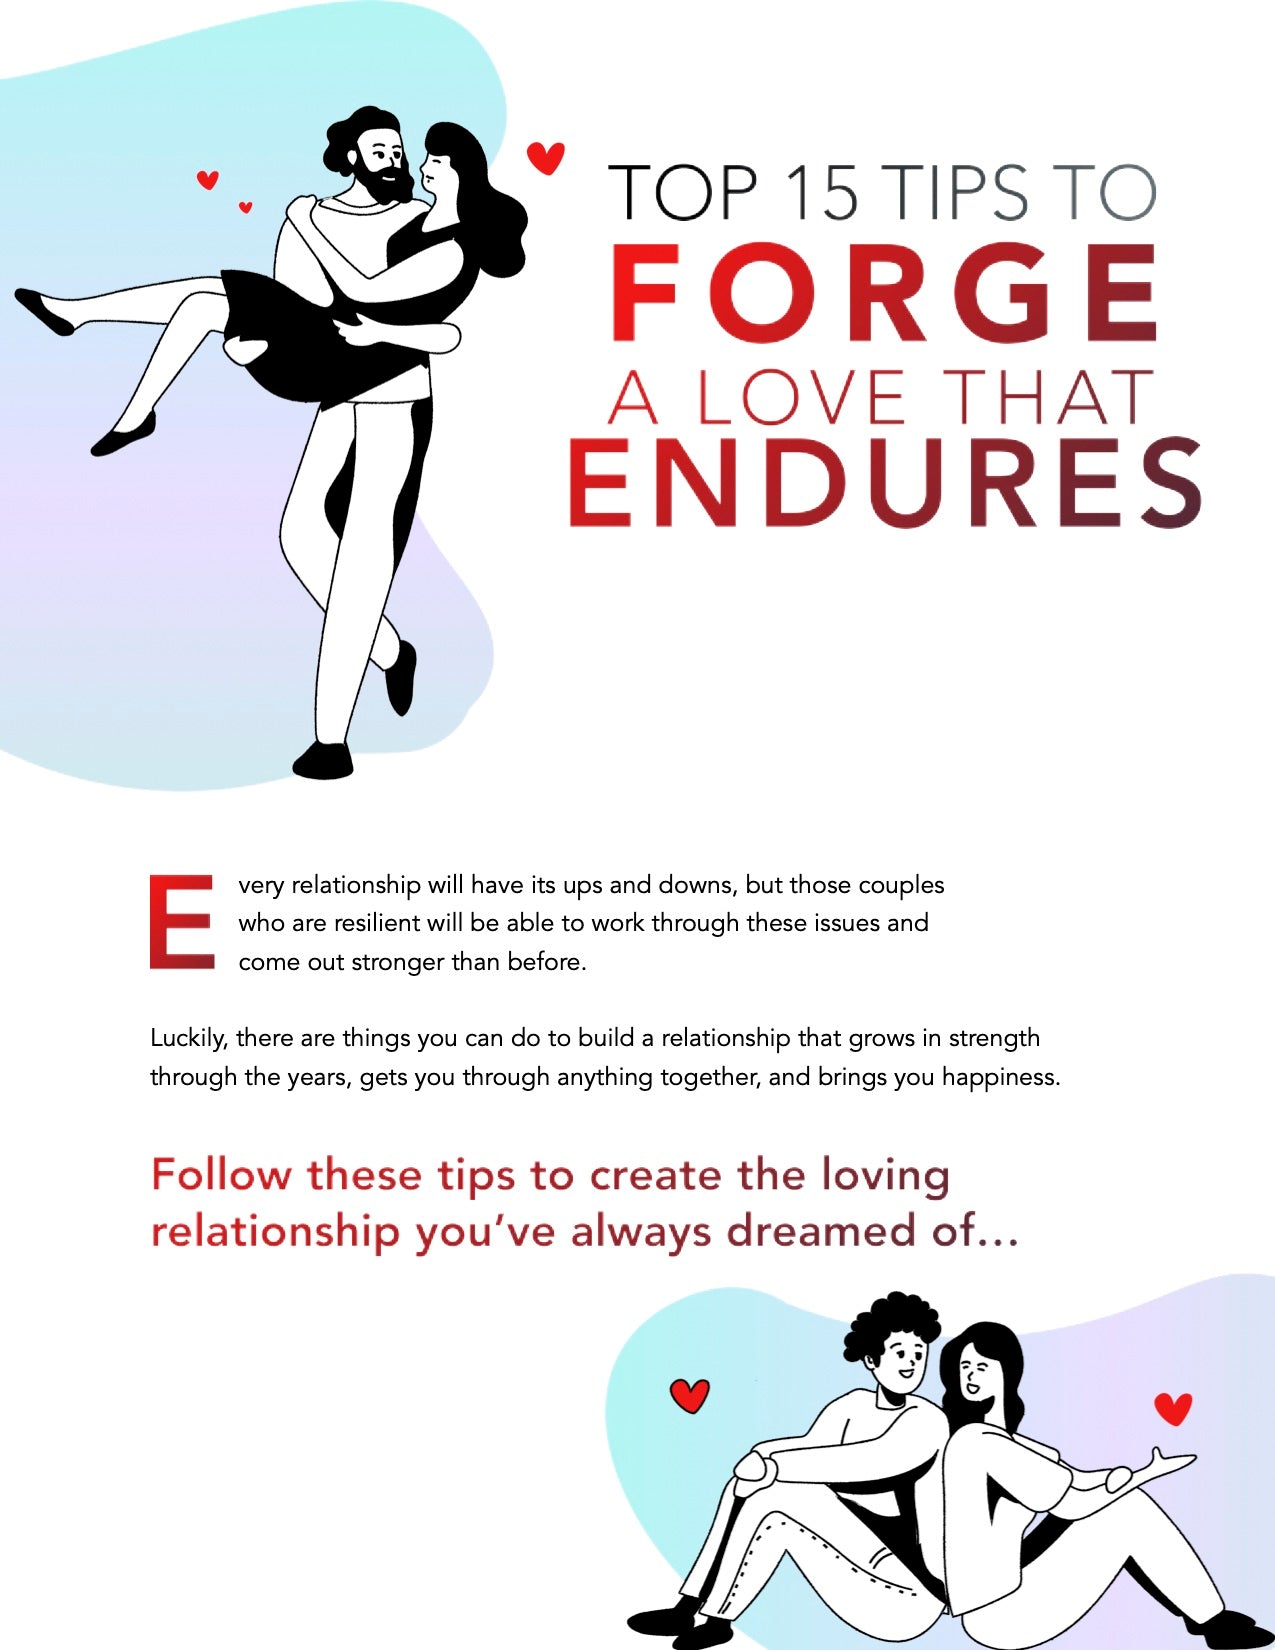 Top 15 Tips To Forge A Love That Endures